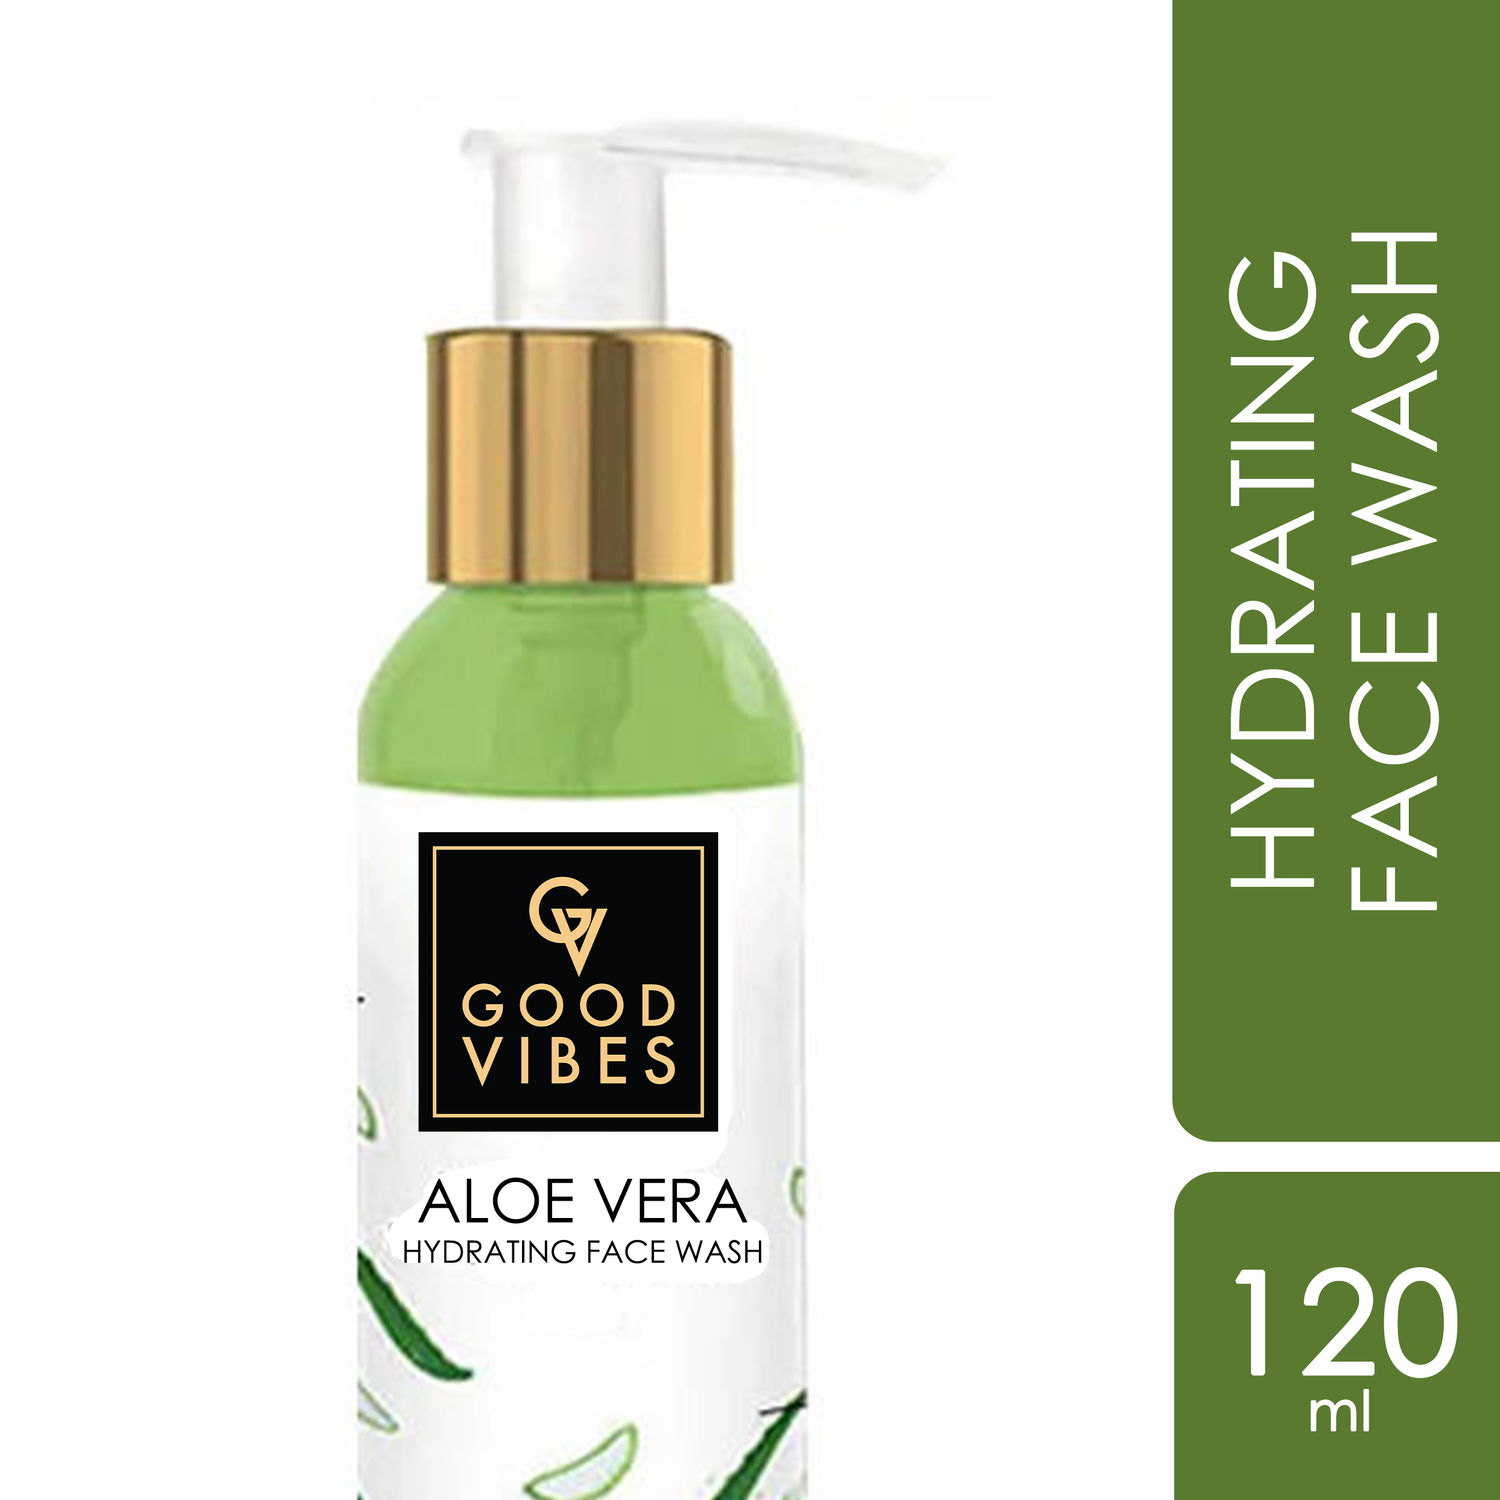 Buy Good Vibes Aloe Vera Hydrating Face Wash | Hydrating, Cleansing | No Parabens, No Mineral Oil, No Animal Testing (120 ml) - Purplle